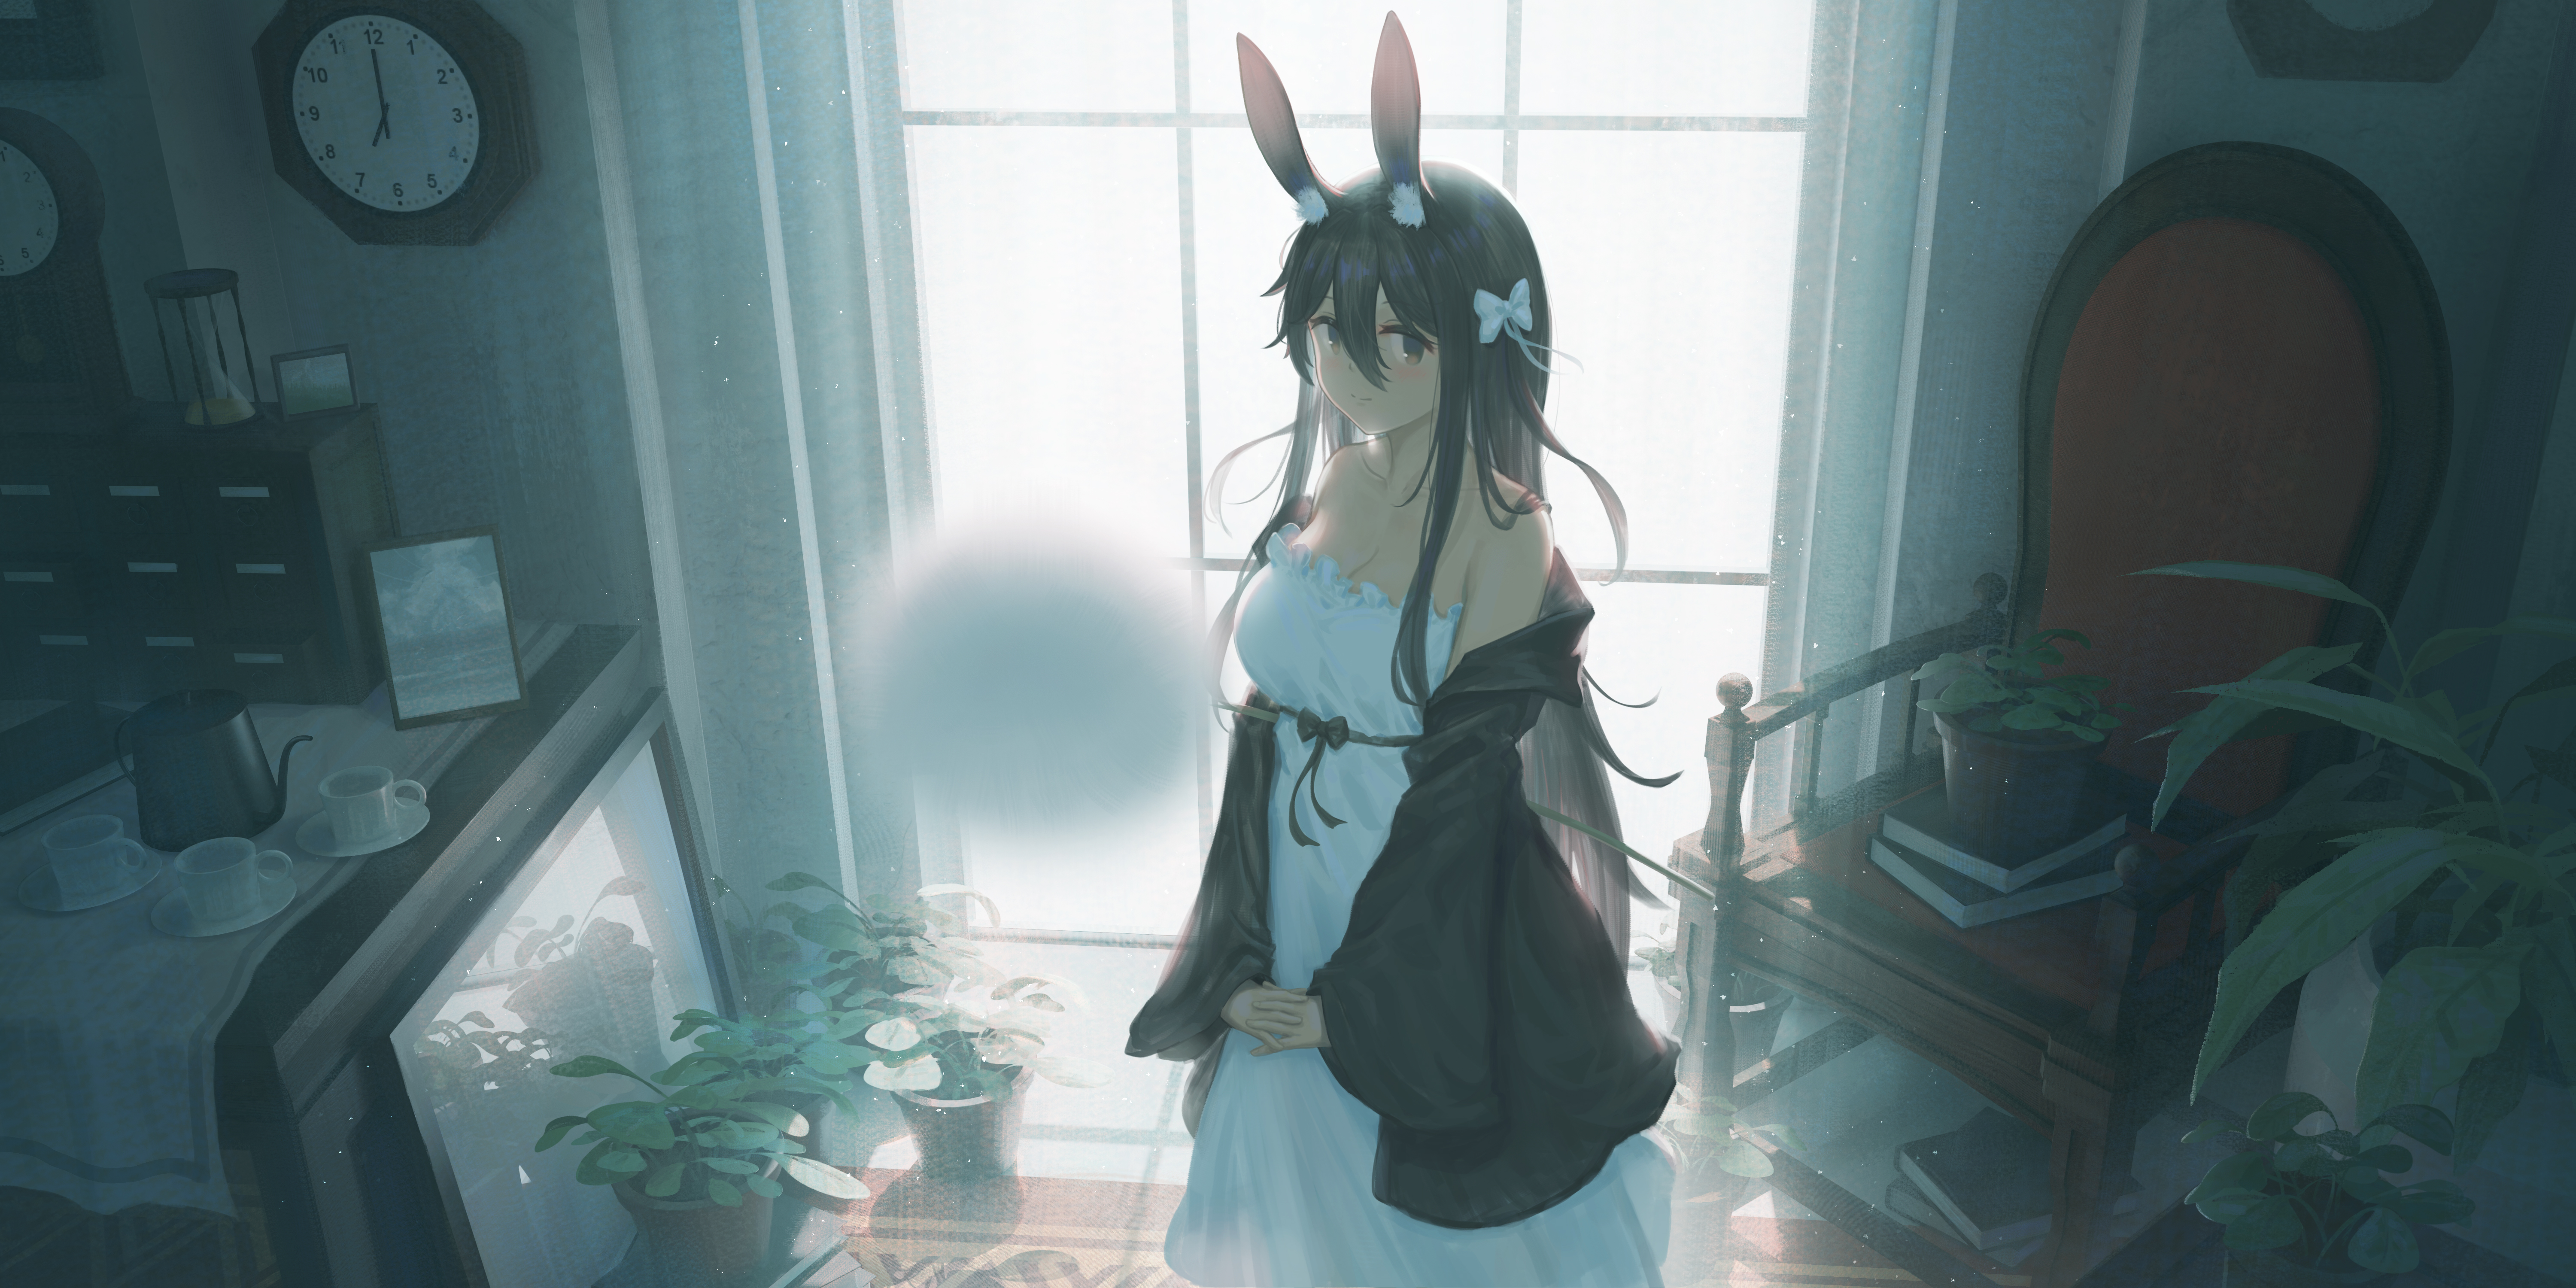 Anime Girls Artwork Bunny Girl Dress Room Standing Bunny Ears Chair Leaves Looking At Viewer Window  6000x3000